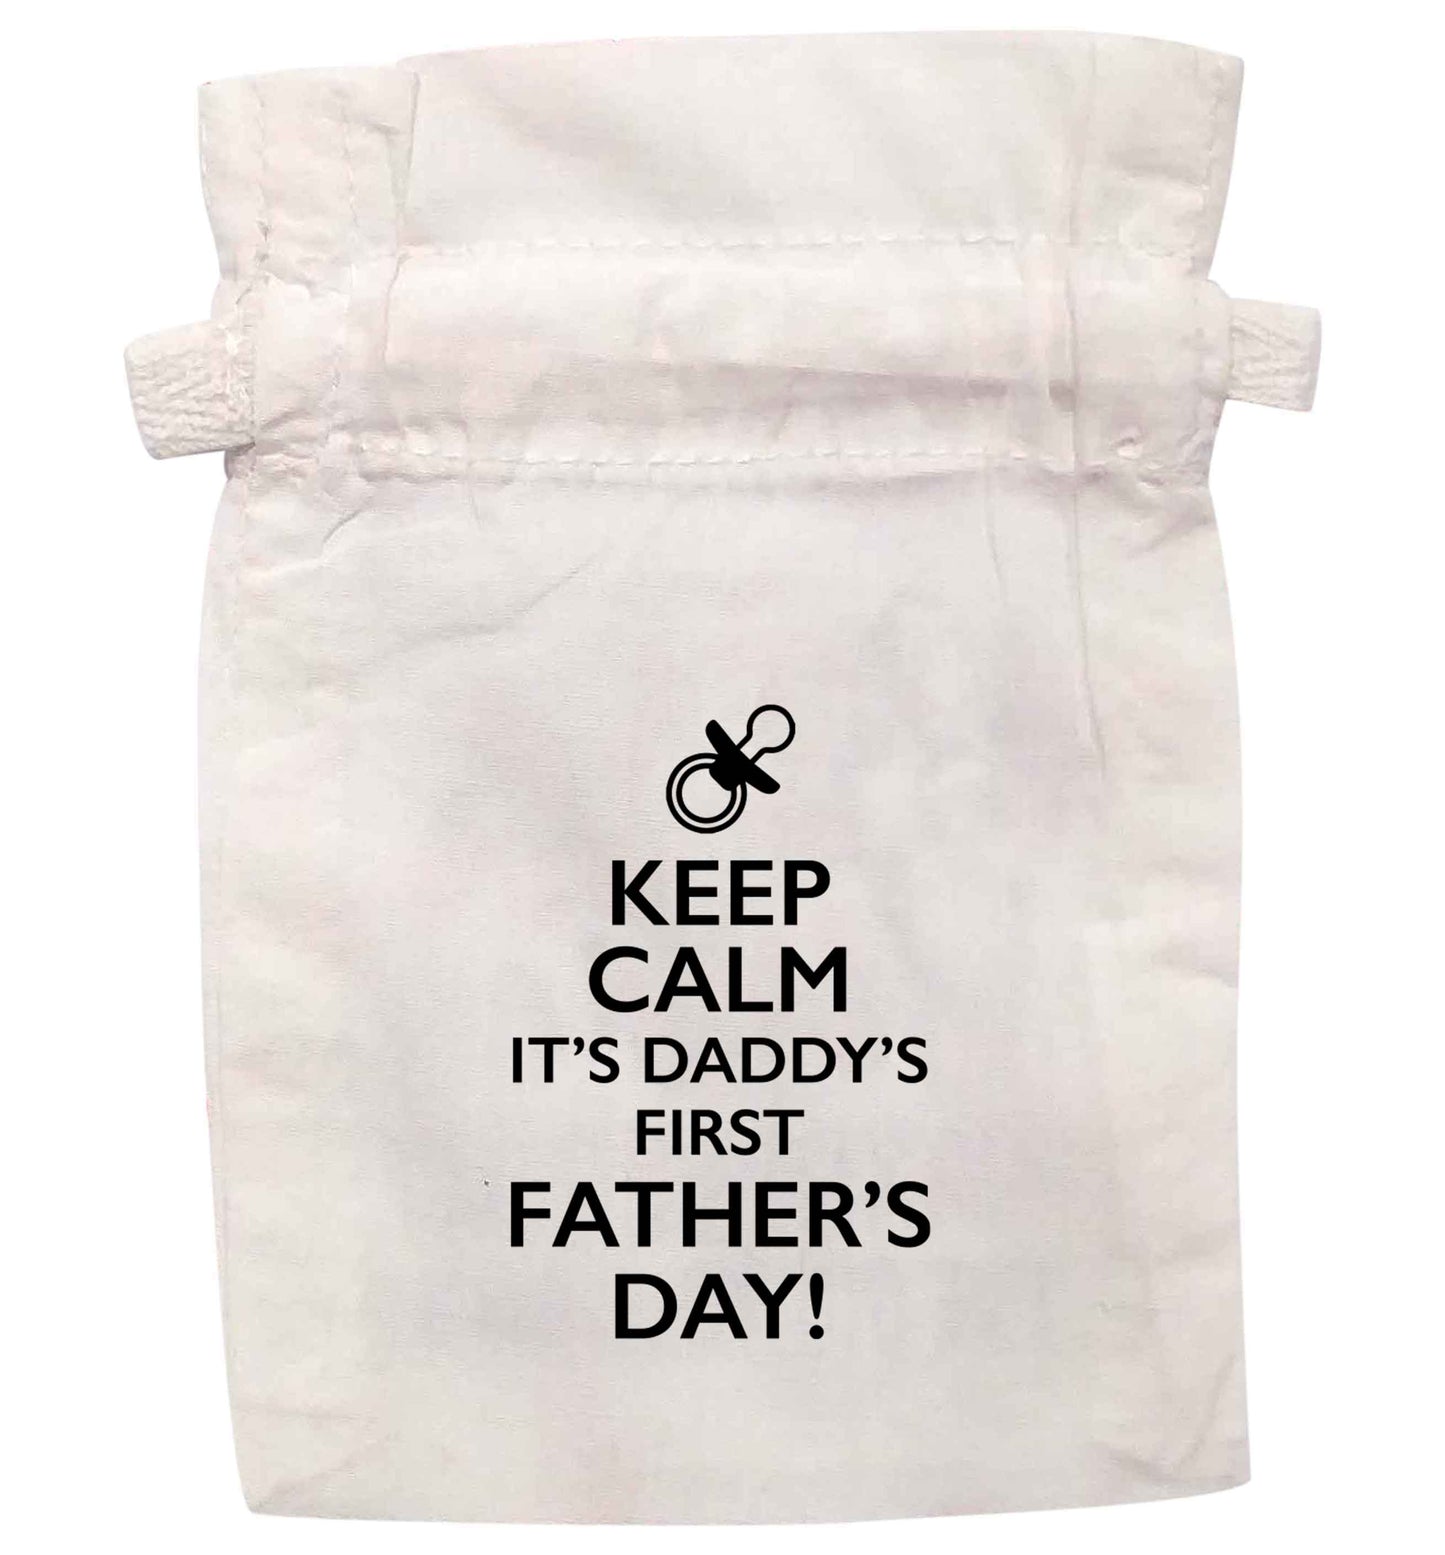 Keep calm it's daddys first Father's Day | XS - L | Pouch / Drawstring bag / Sack | Organic Cotton | Bulk discounts available!